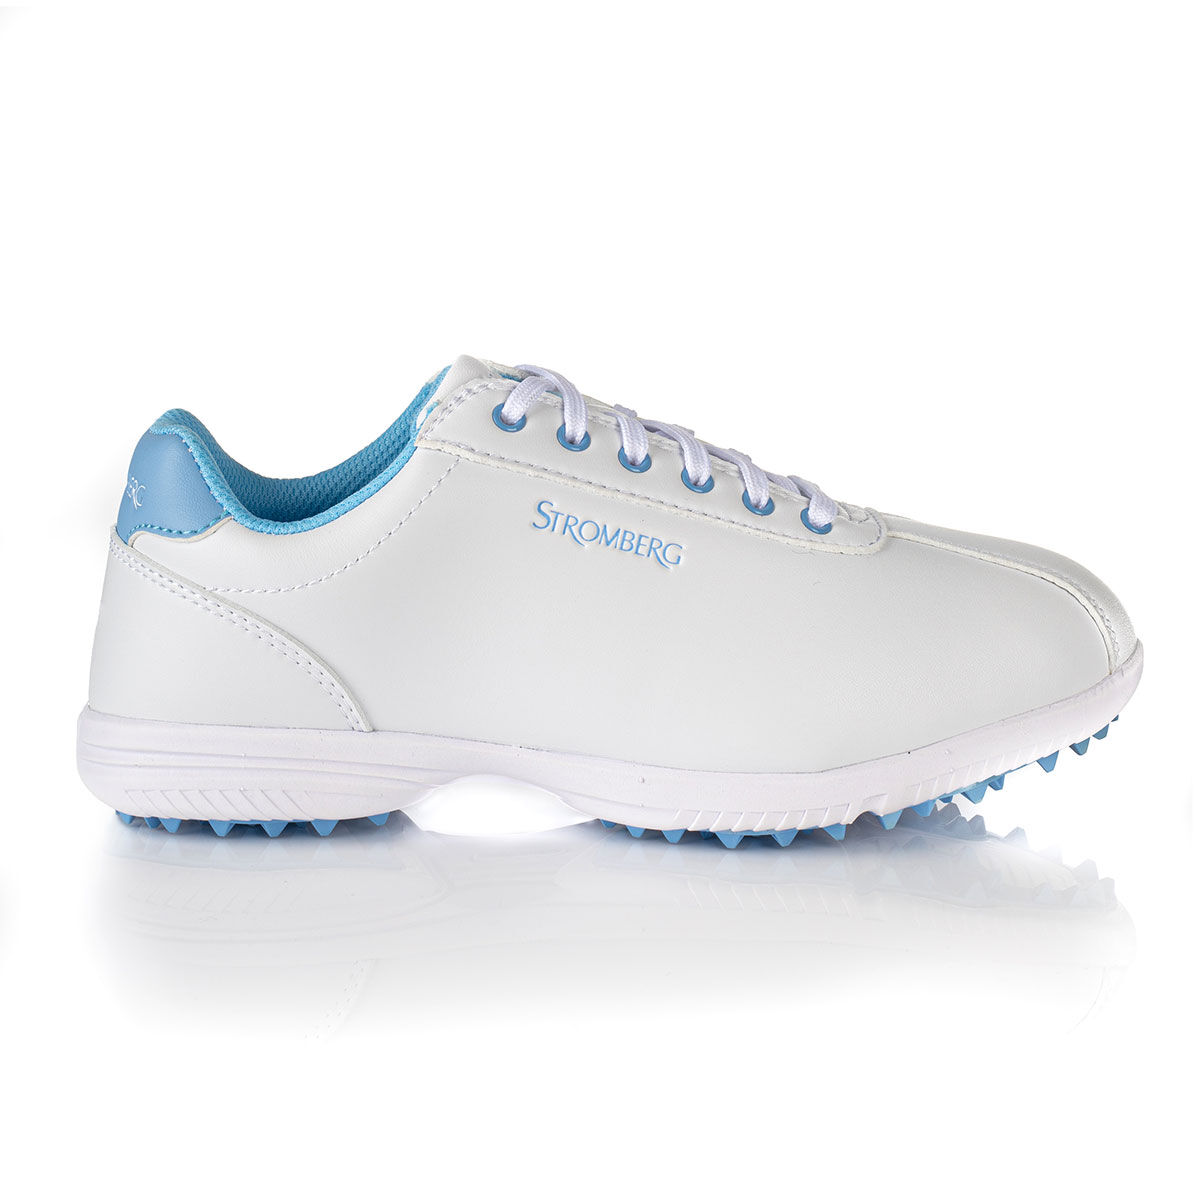 Stromberg White and Blue Mia Spikeless Golf Shoes, Womens | American Golf, Size: 8